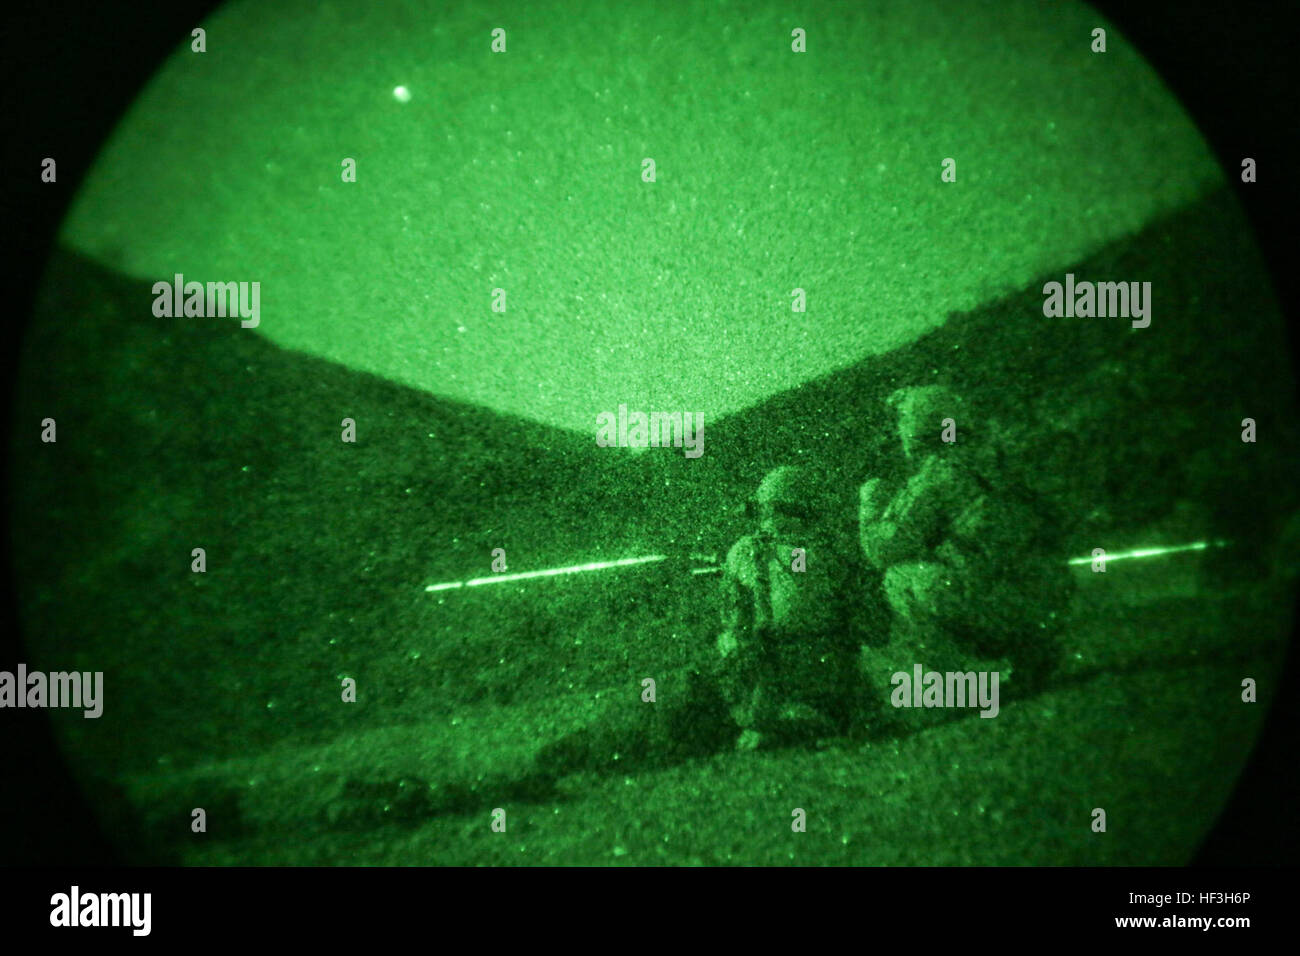 ARTA BEACH, Djibouti (July 22, 2015) U.S. Marines with Battalion Landing Team 3rd Battalion, 1st Marine Regiment, 15th Marine Expeditionary Unit, fire M4 Carbines during a night-fire exercise.  The Marines of BLT 3/1 executed a series of attack and maneuver drills consisting of, machine gun, squad and night attacks.  Elements of the 15th Marine Expeditionary Unit are ashore in Djibouti for sustainment training to maintain and enhance the skills they developed during their pre-deployment training period.  The 15th MEU is currently deployed in support of maritime security operations and theater  Stock Photo